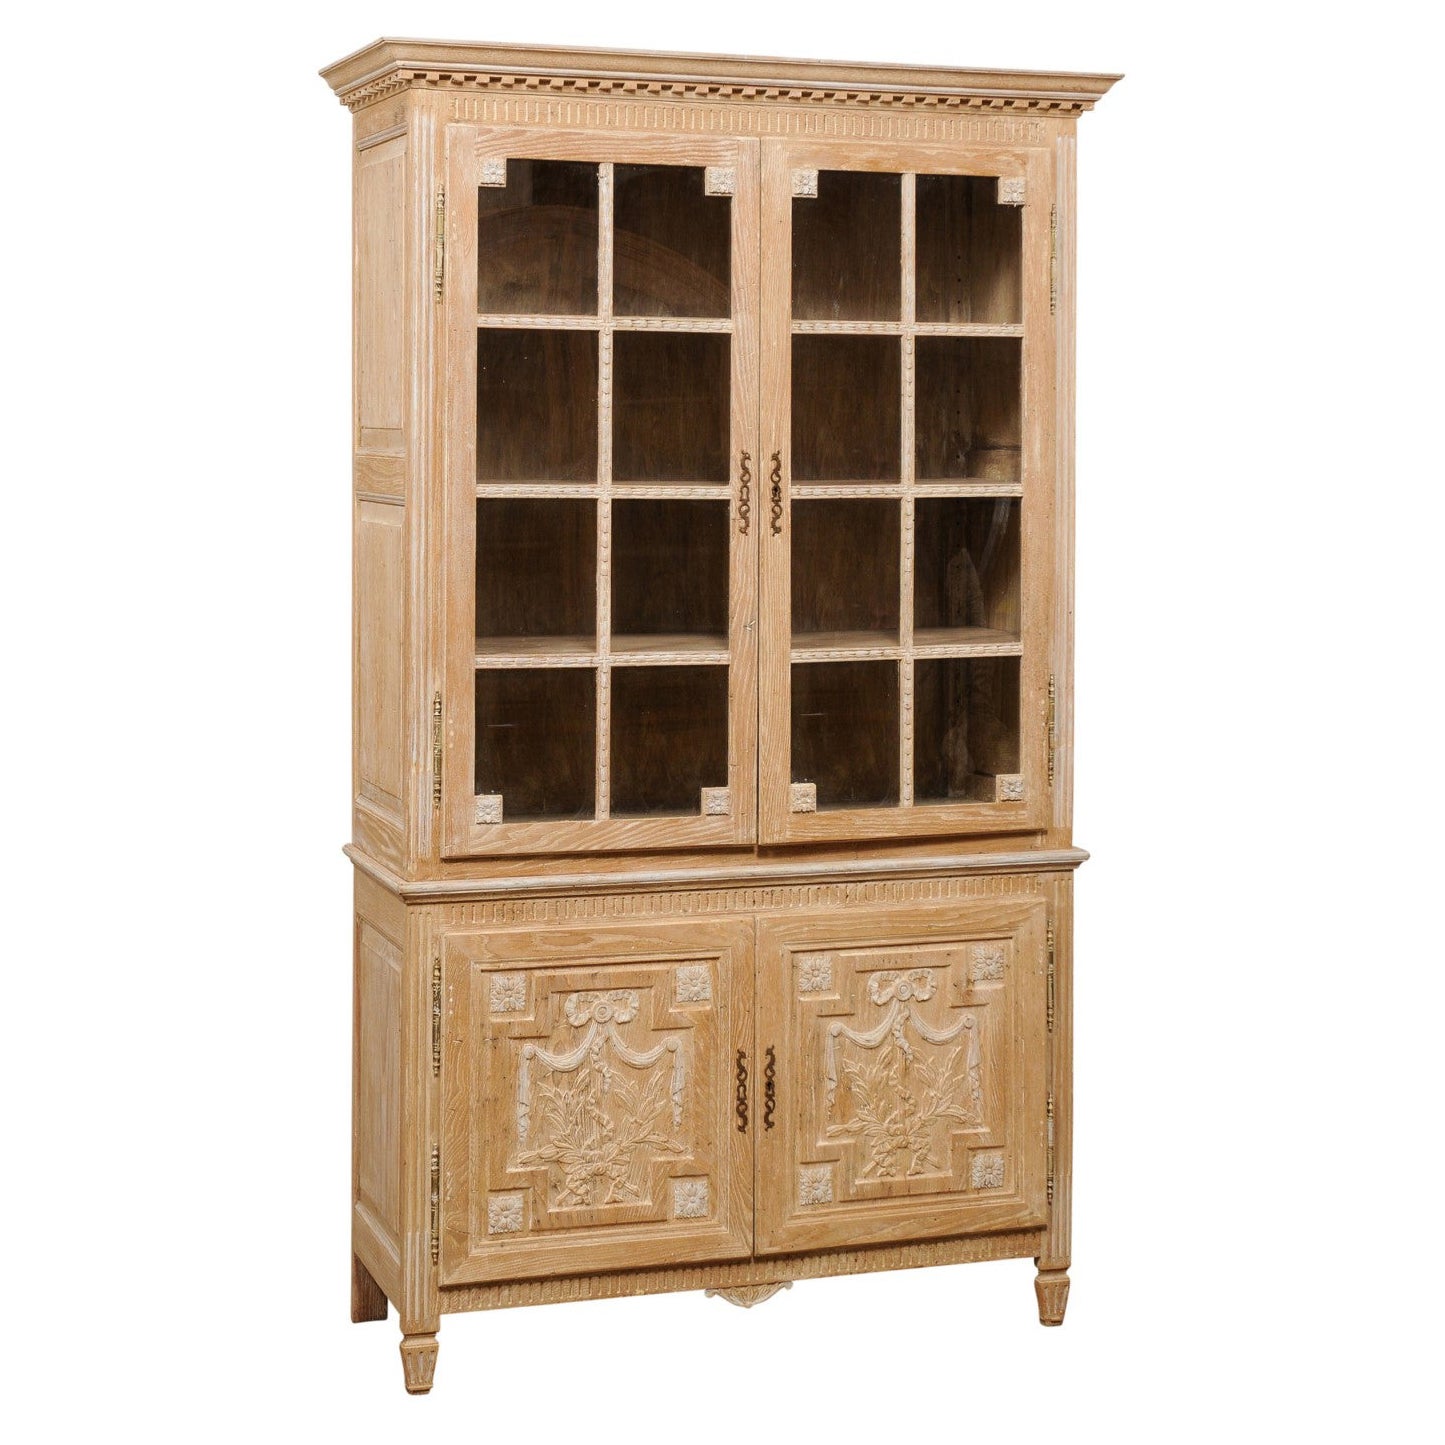 French Display and Storage Cabinet with Neoclassical Influences